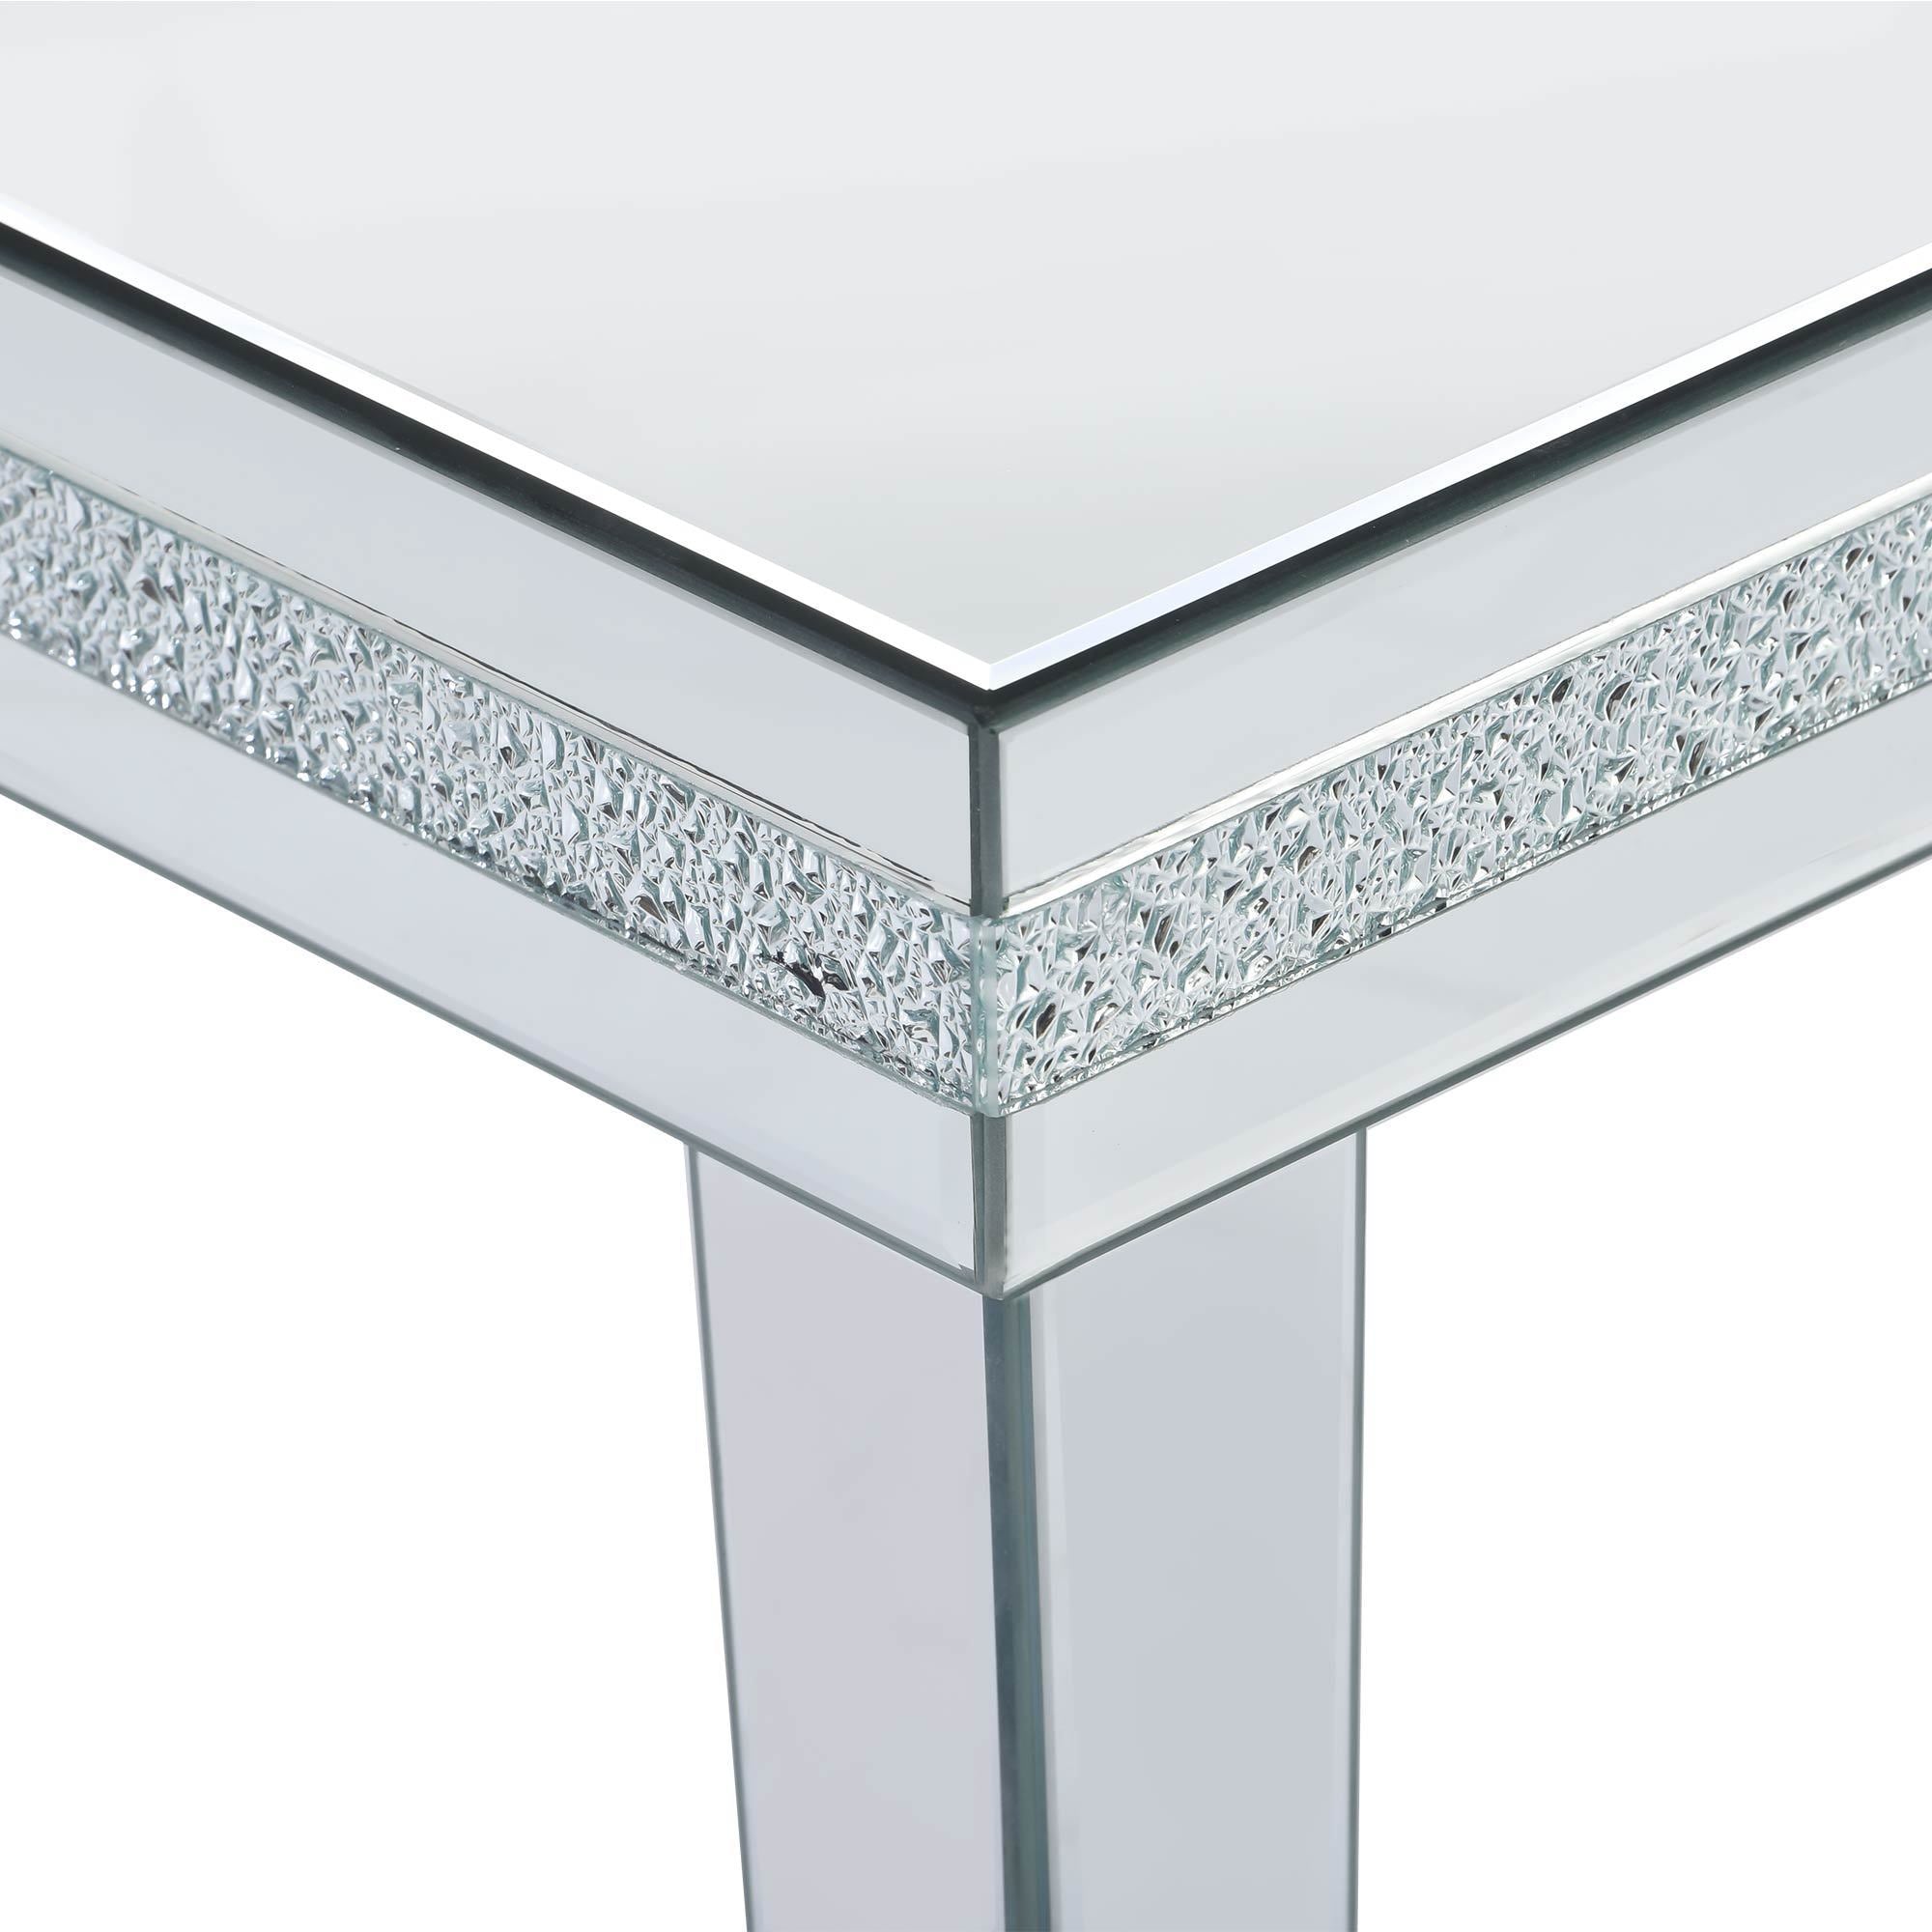 35.40" Modern Glass Mirrored Coffee Table with Crystal Inlay Design